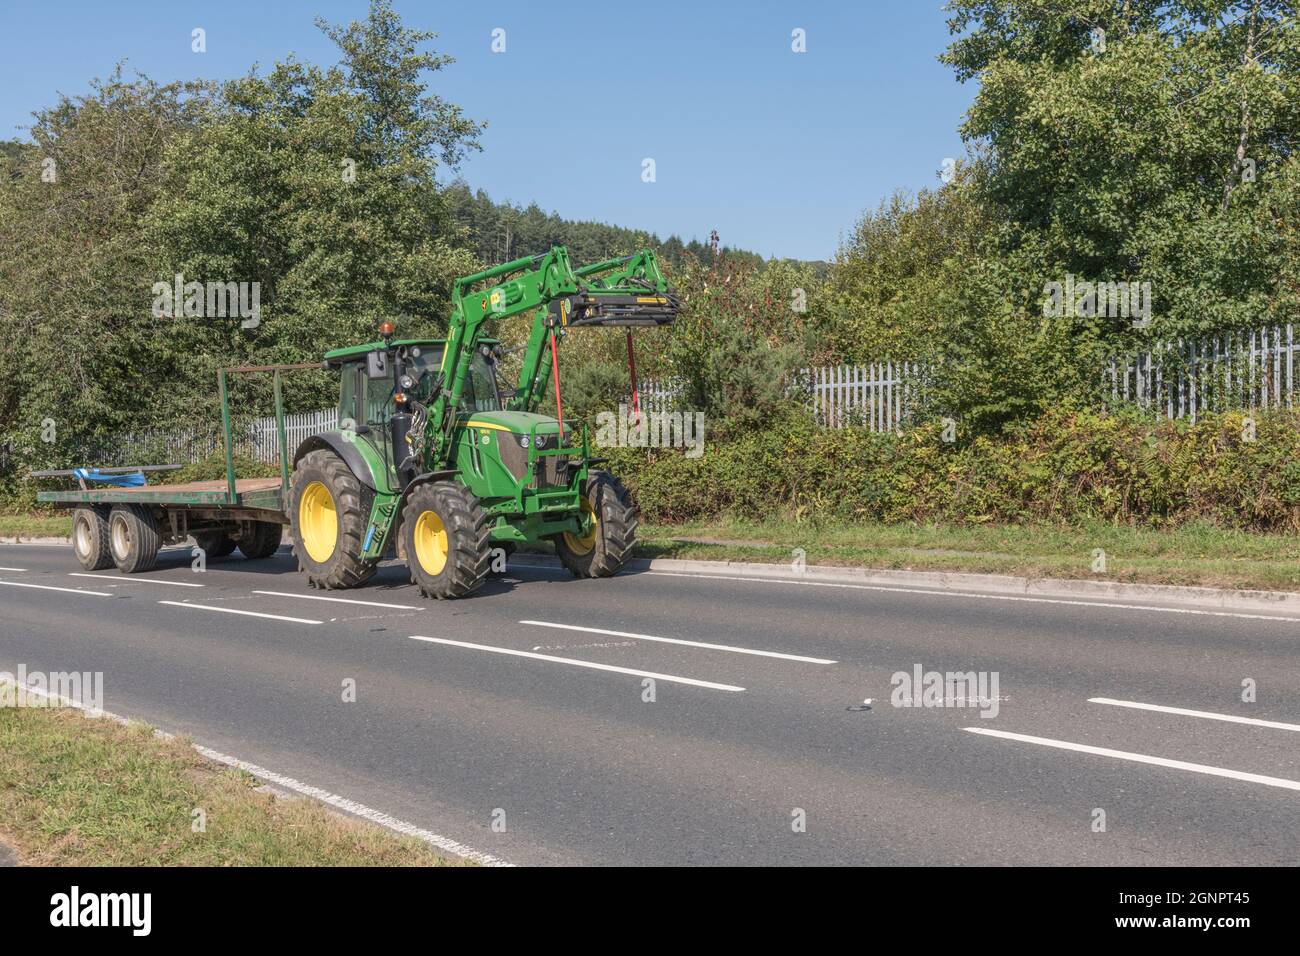 Familiar green John Deere farm tractor on open uphill rural country road, with trailer hitched. Large tyre Deere model is 6115 RC. Stock Photo